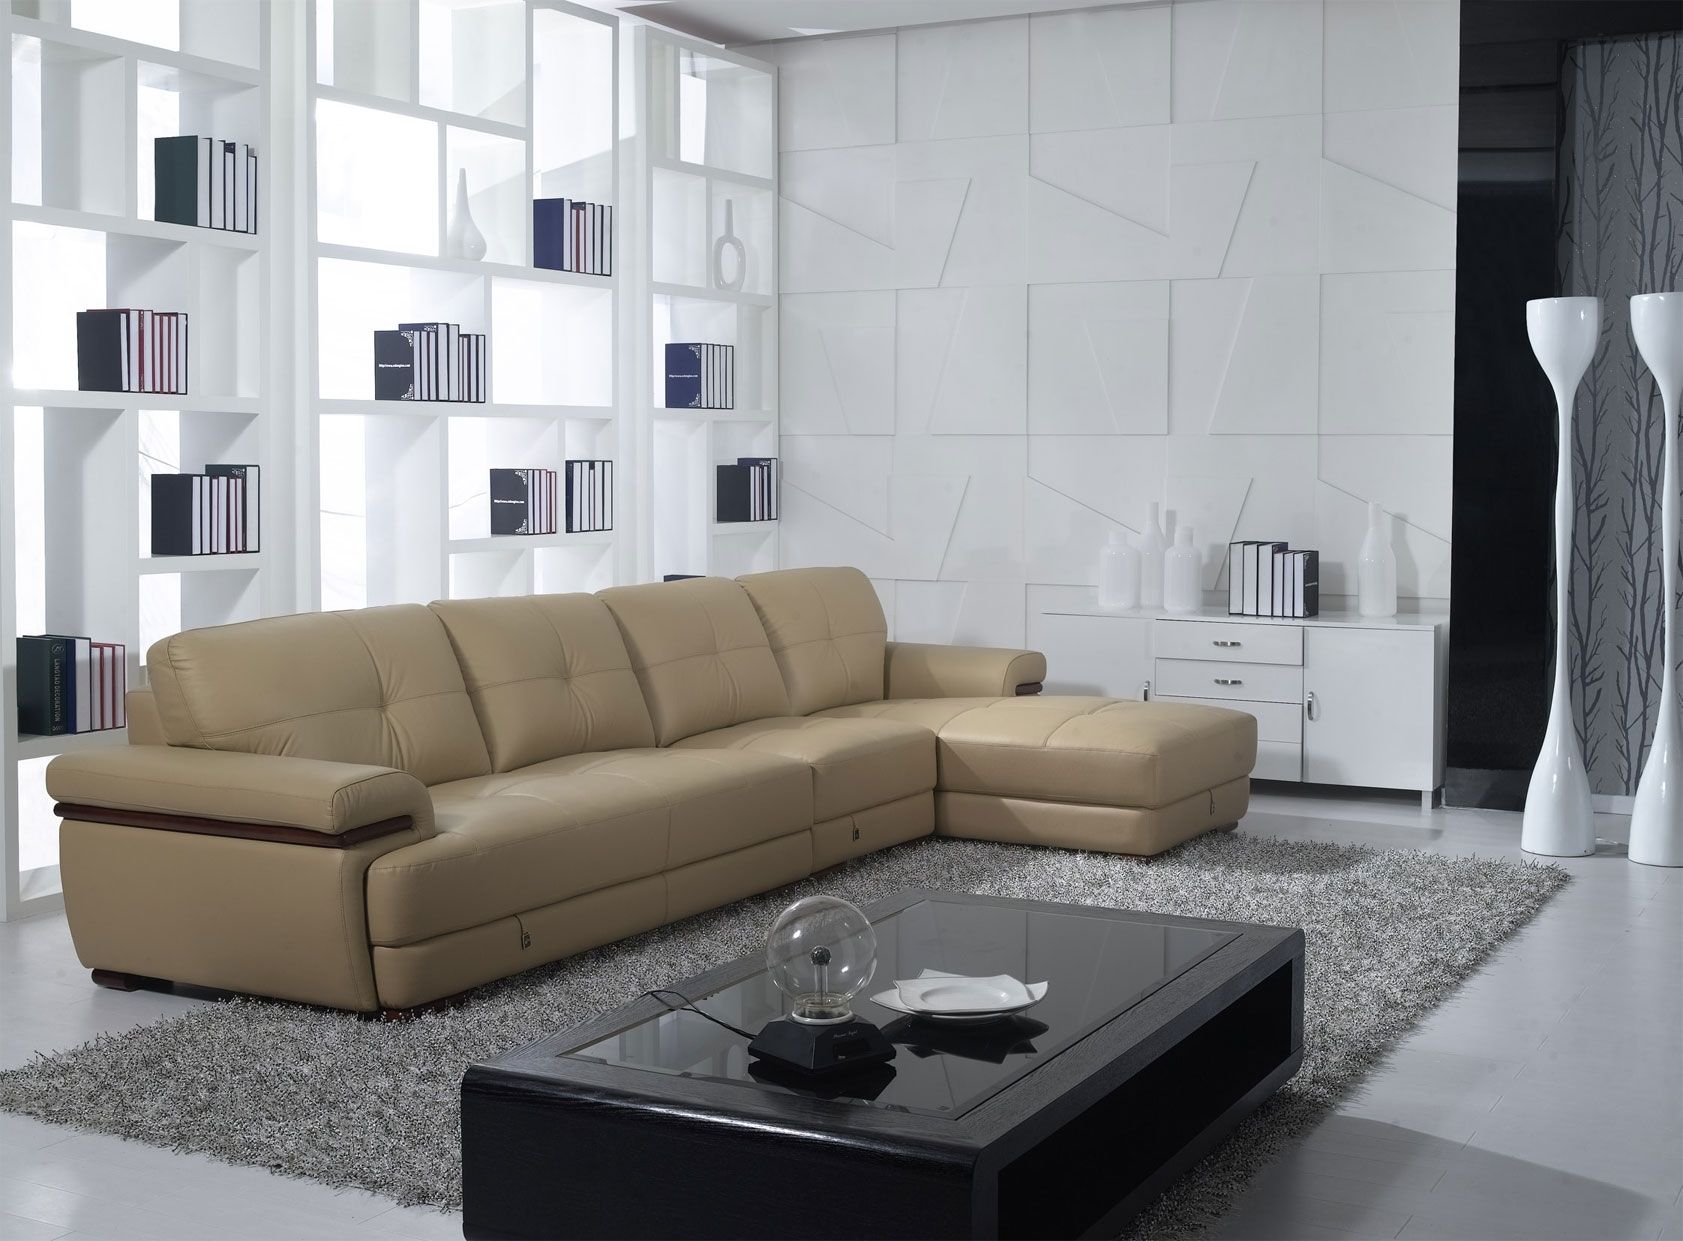 Fancy Quality Sectional Sofas 15 And Couches Ideas With High Sofa With Good Quality Sectional Sofas (View 2 of 10)